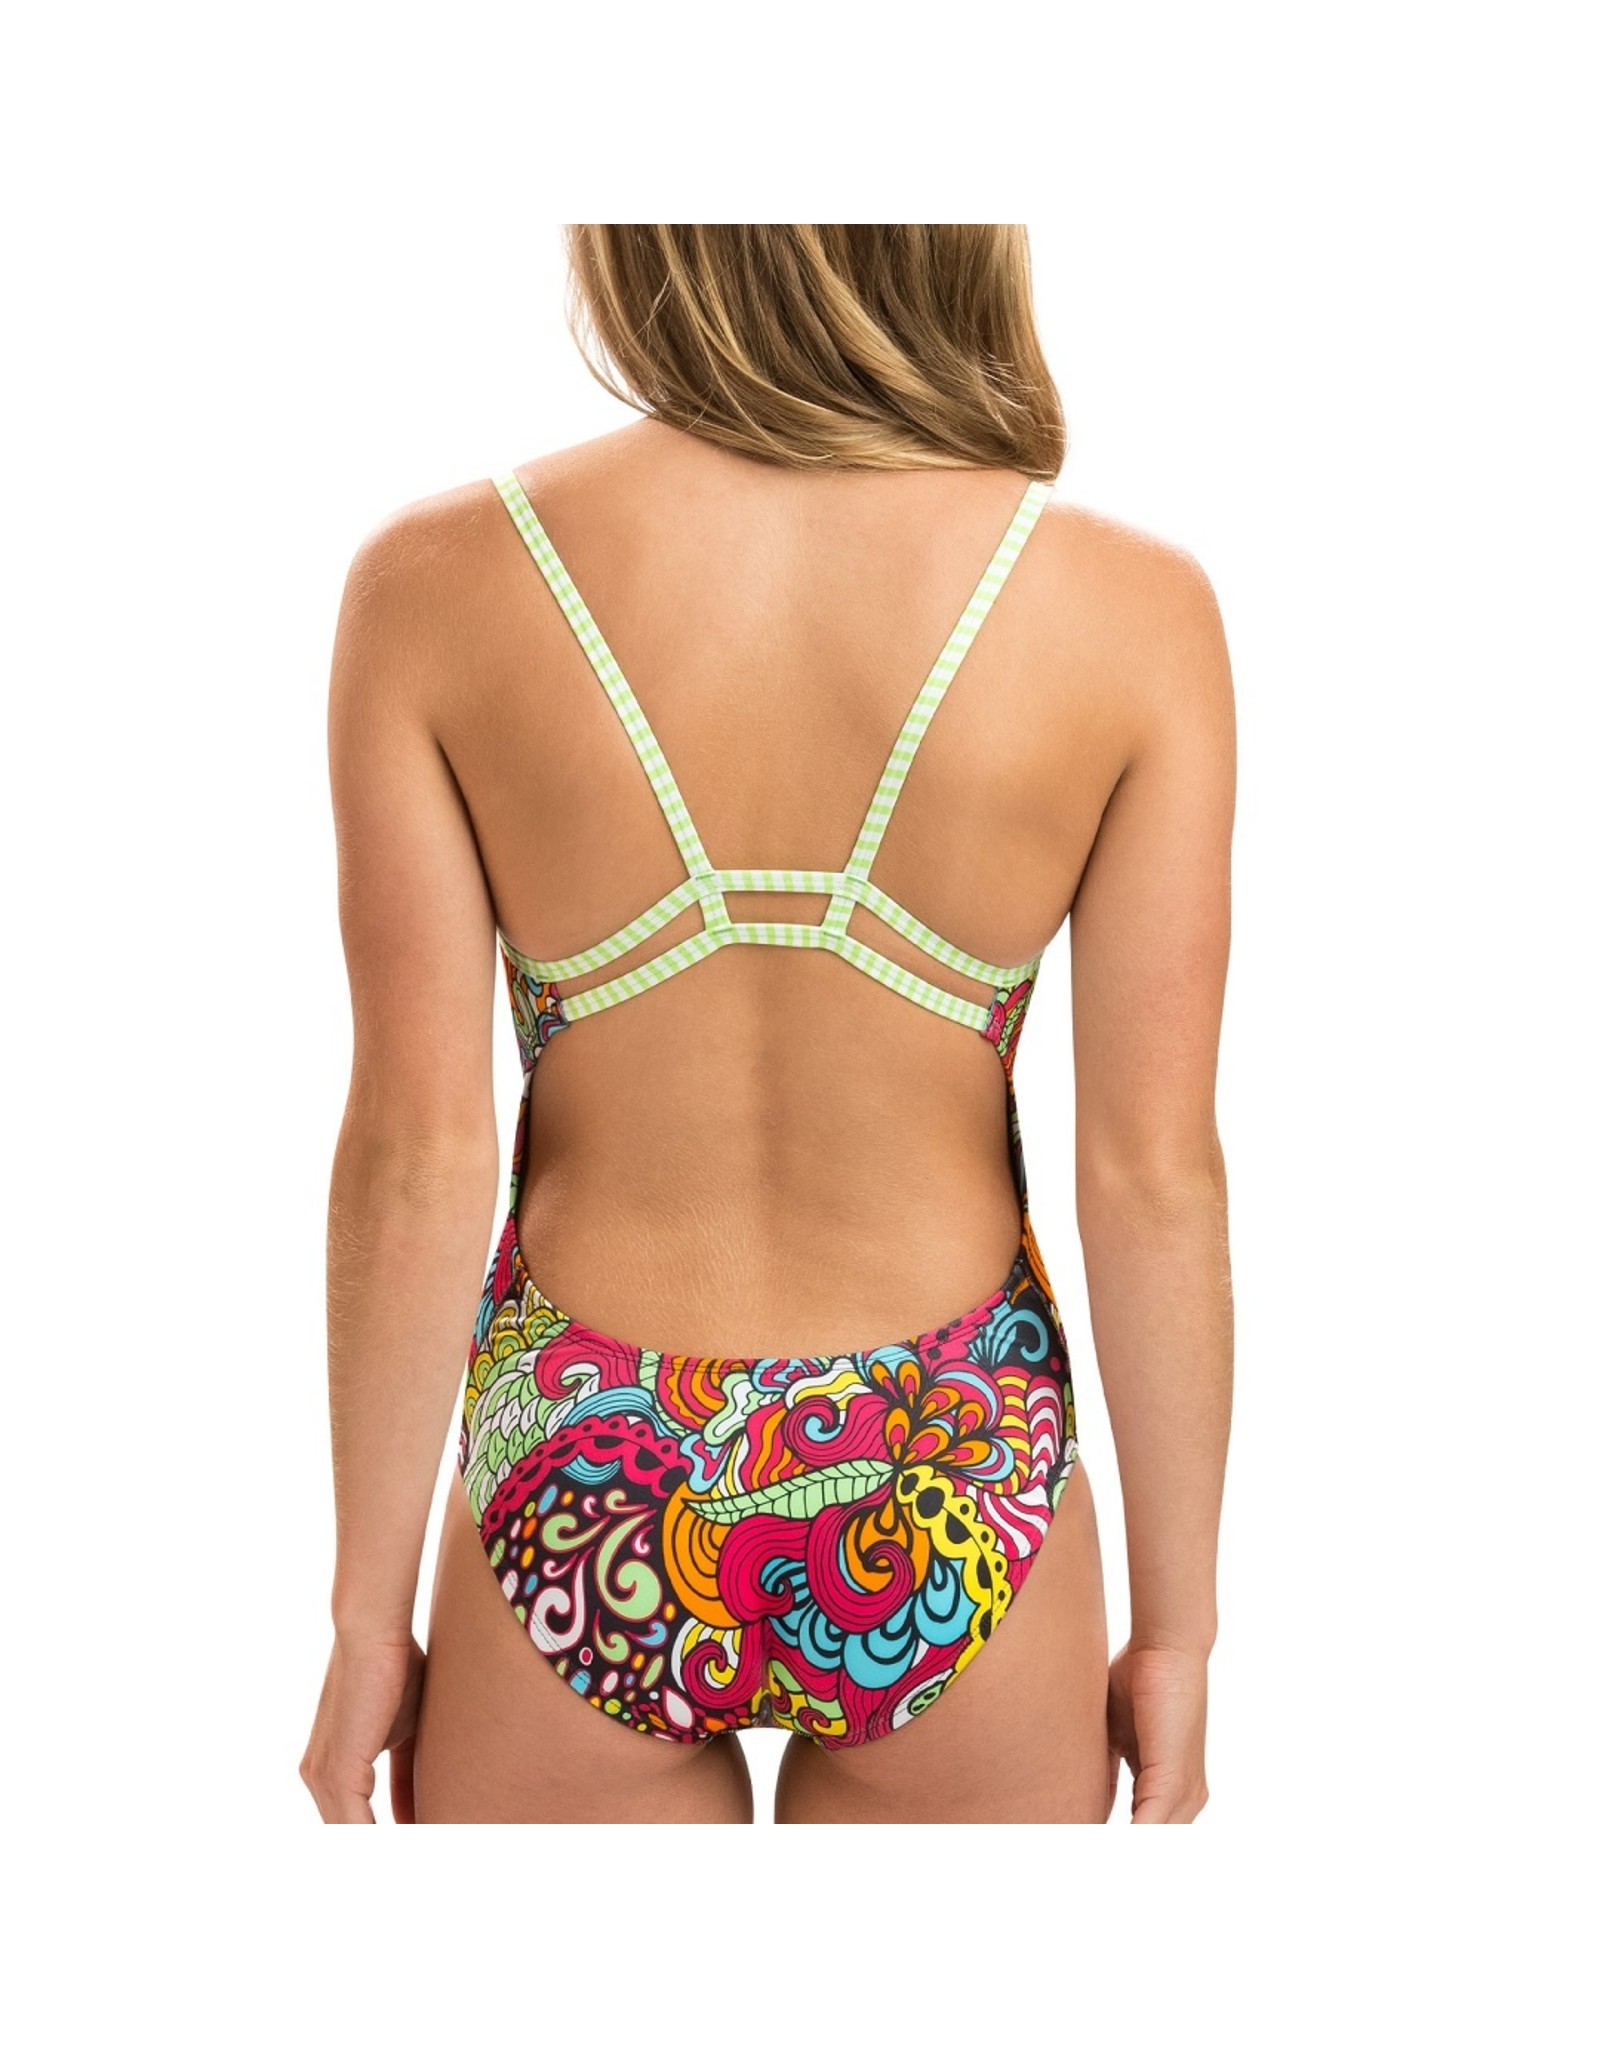 Women's Dolfin Uglies Floral Strappy One-Piece Swimsuit